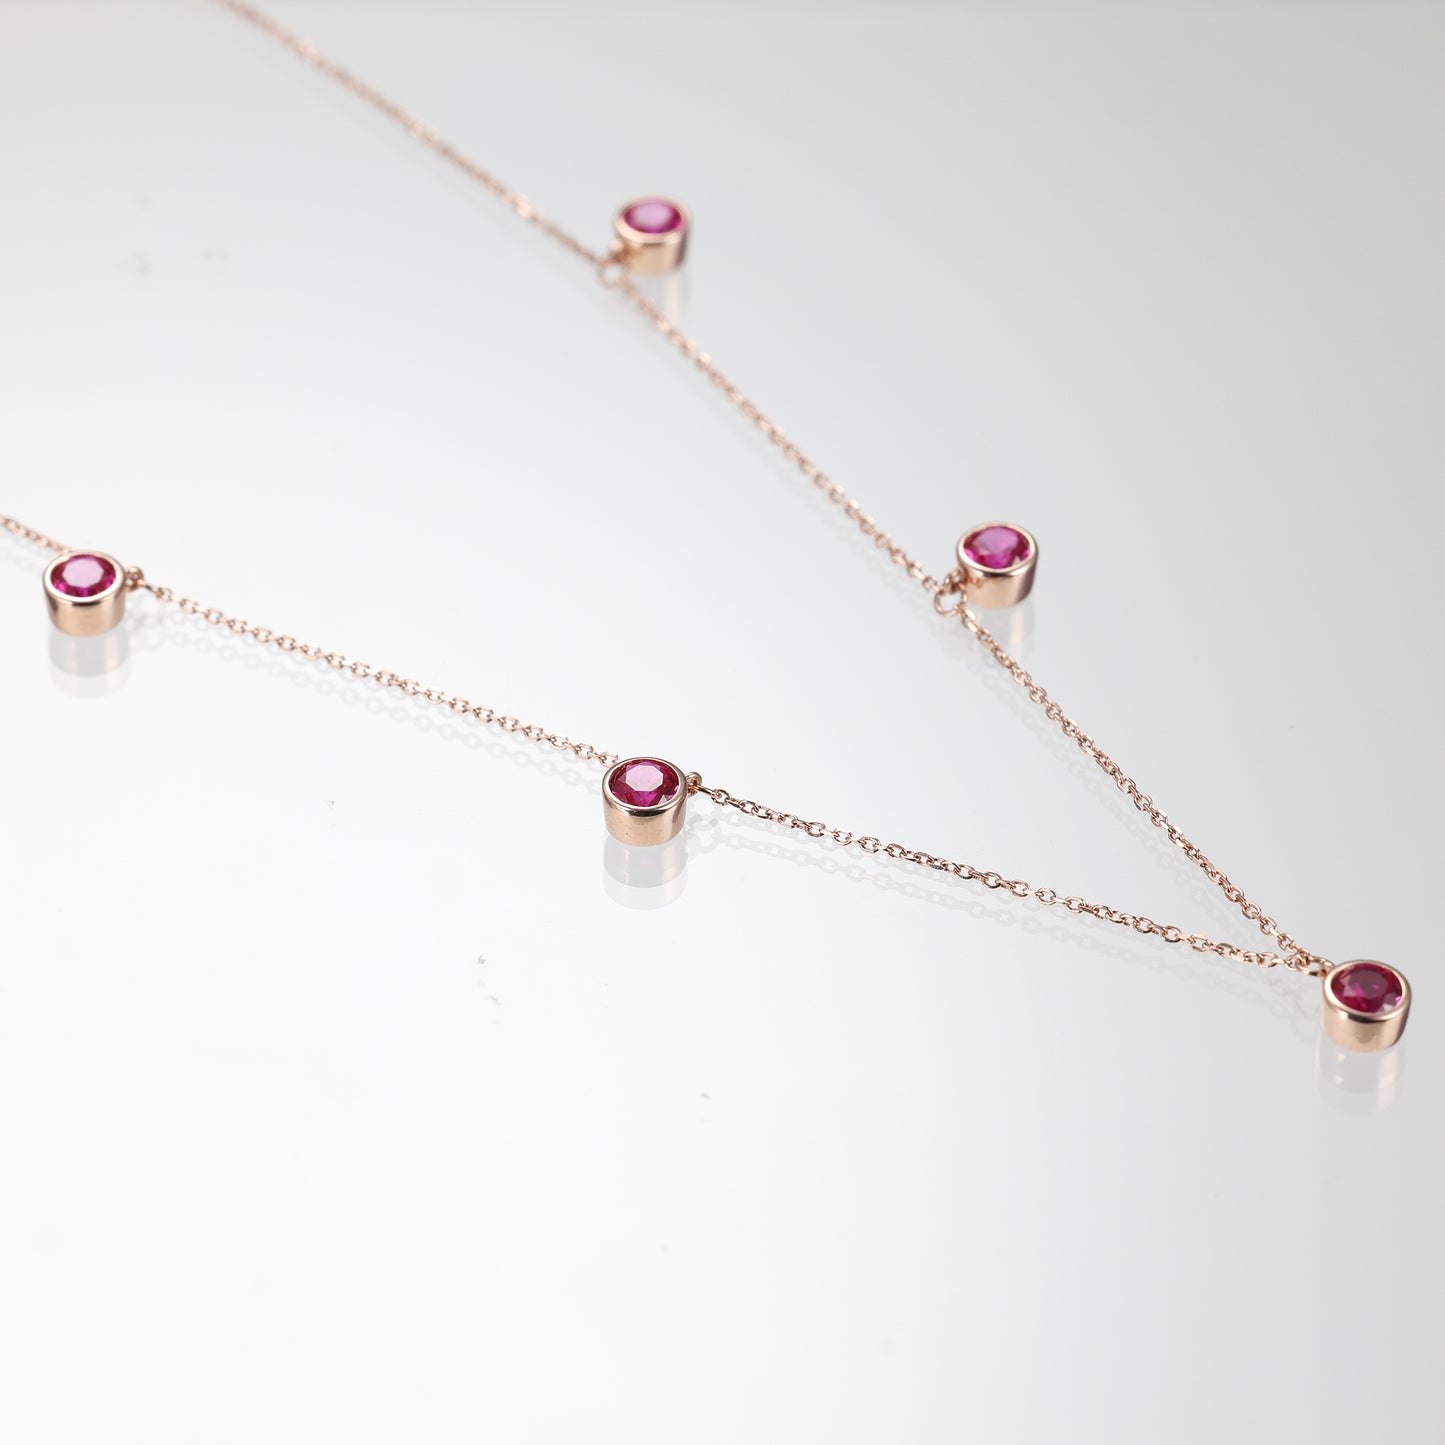 Round Ruby Charm Choker Necklace